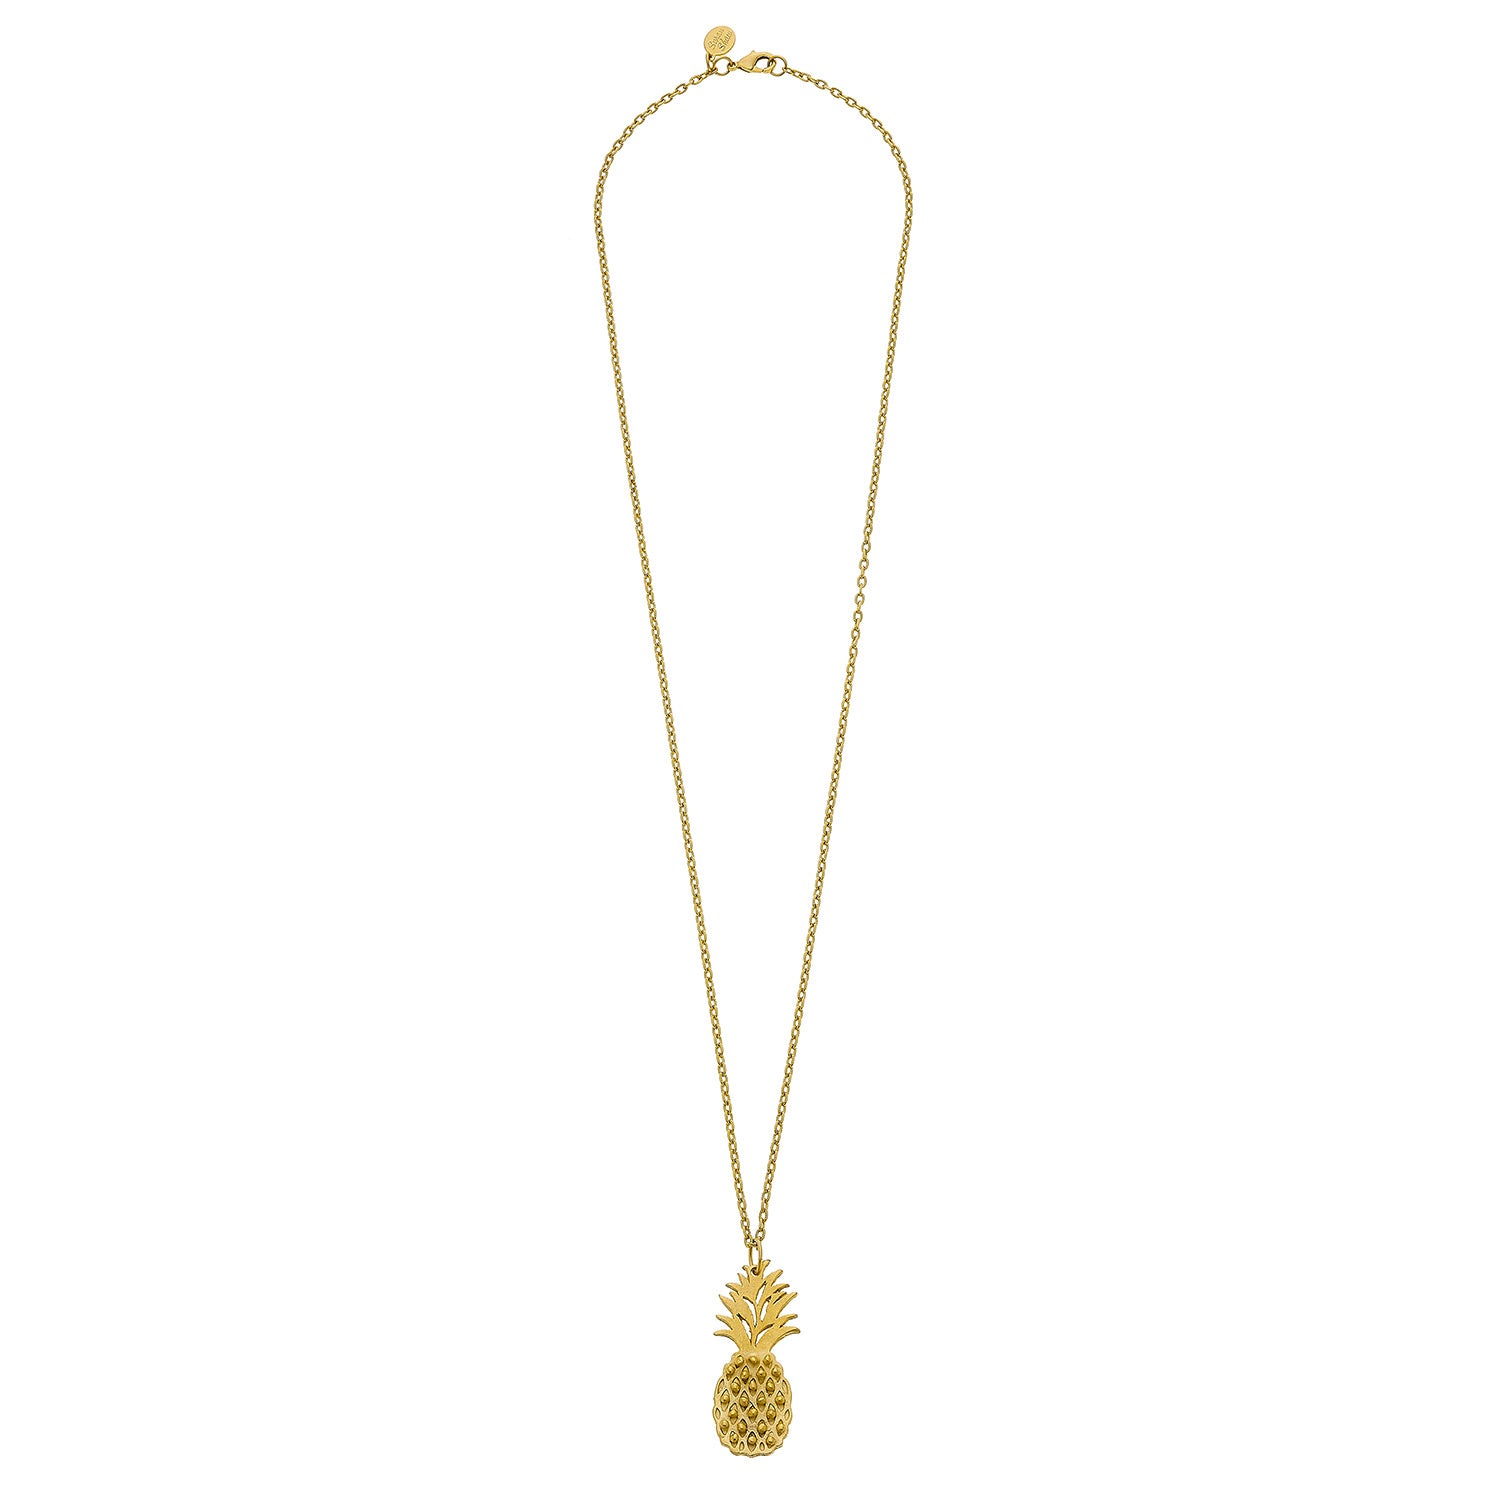 Susan Shaw Gold Plated Pineapple Pendant Necklace